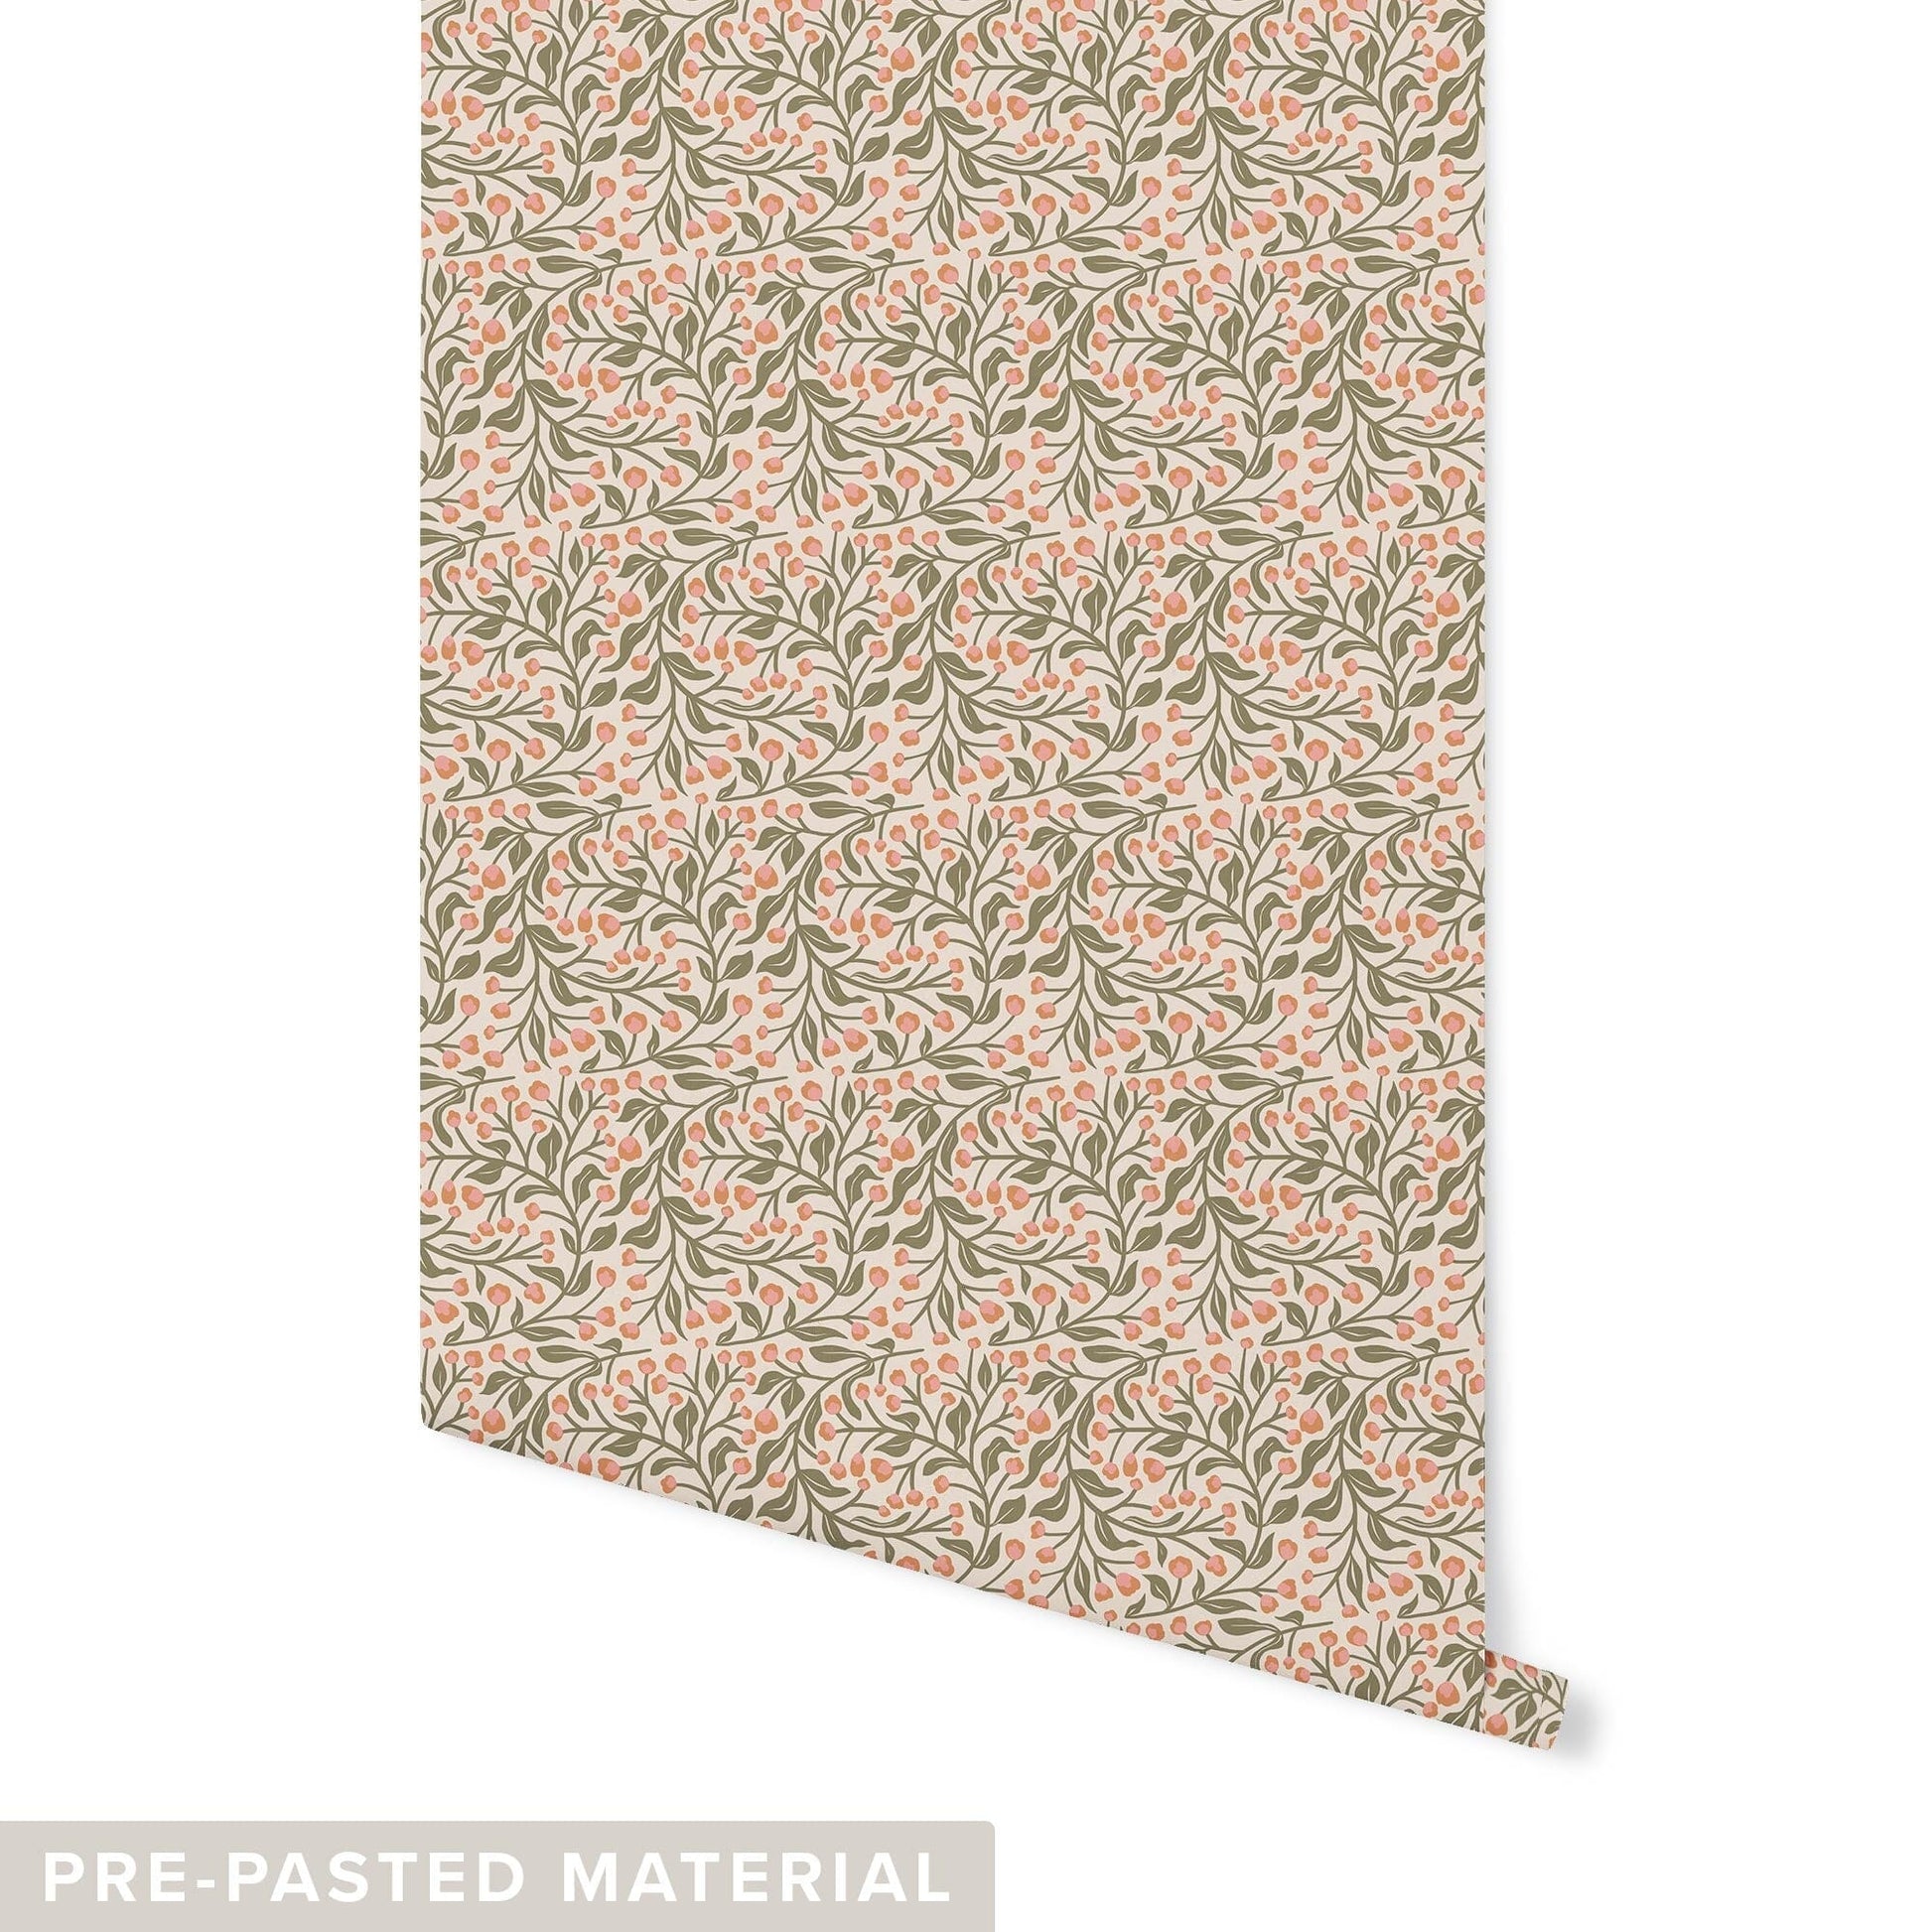 Floral Vine Wallpaper Wallpaper Urbanwalls Pre-pasted Coral & Beige DOUBLE ROLL : 46" X 4 FEET